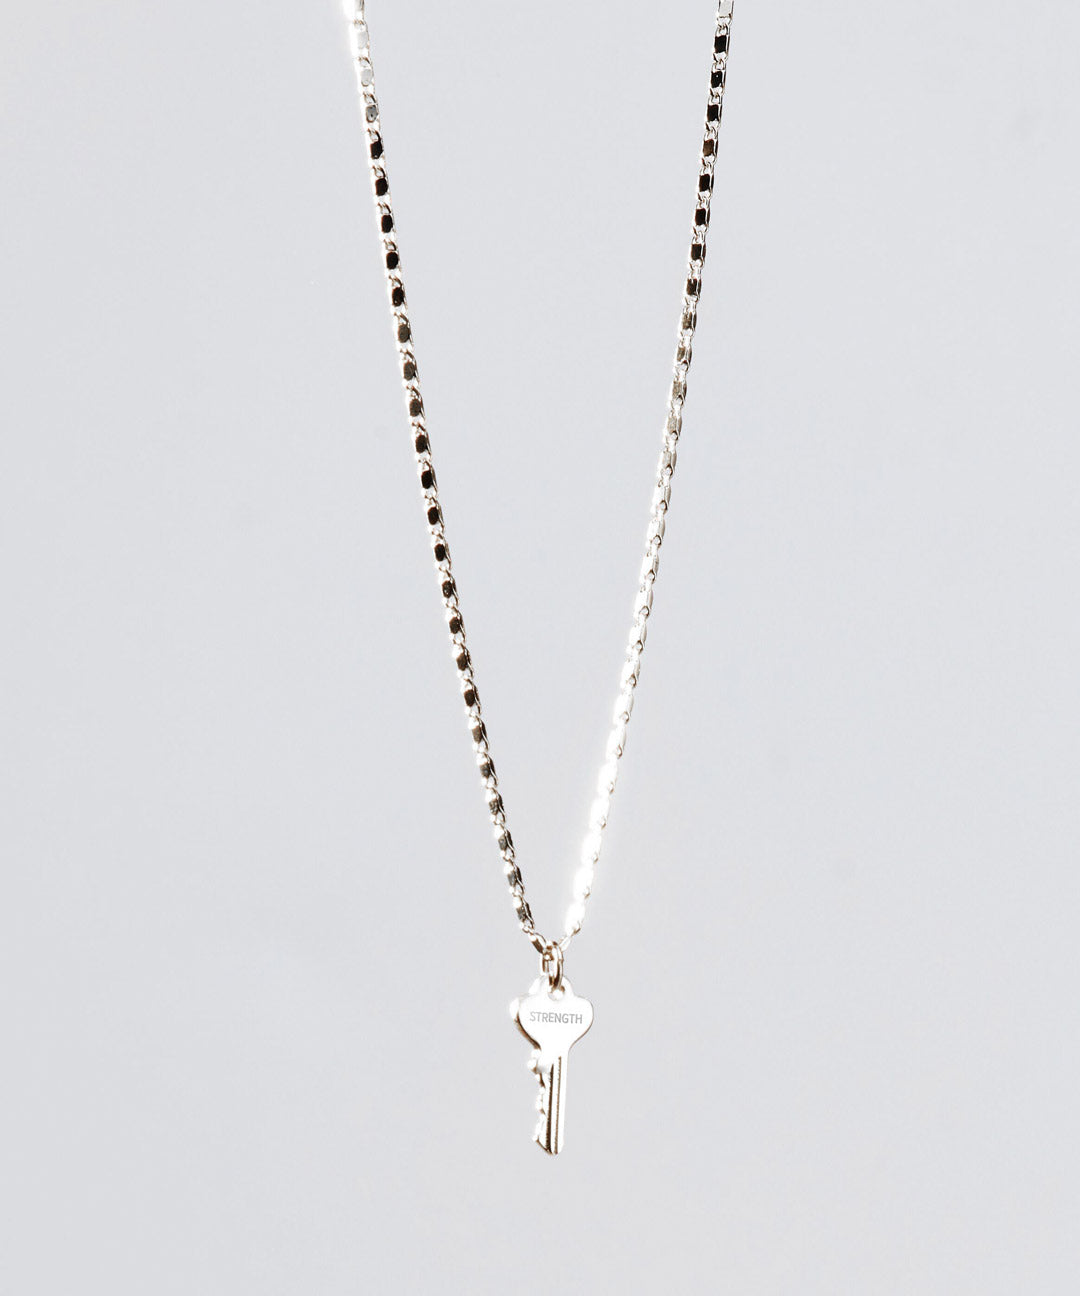 Petite Key Necklace Necklaces The Giving Keys STRENGTH Silver 